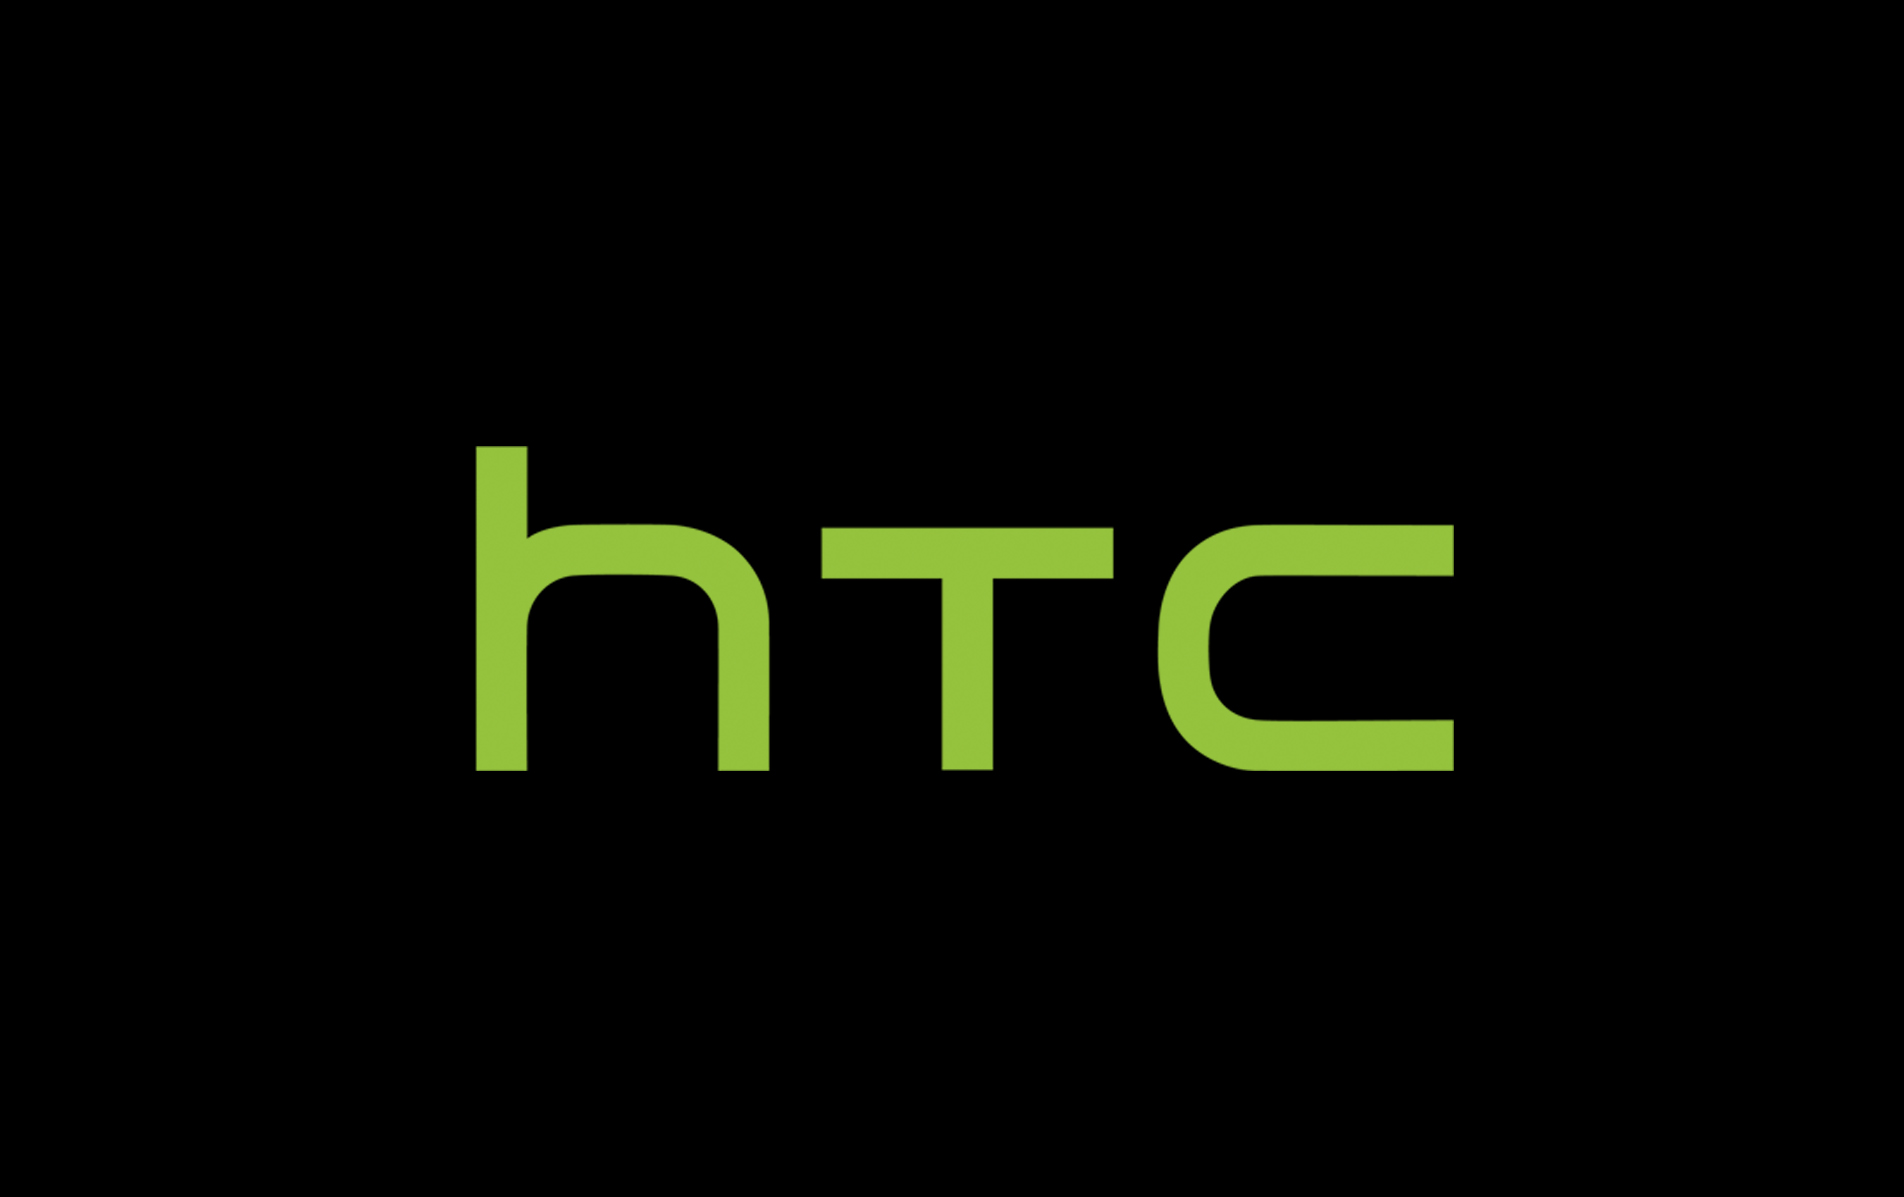 green htc text on black background #433